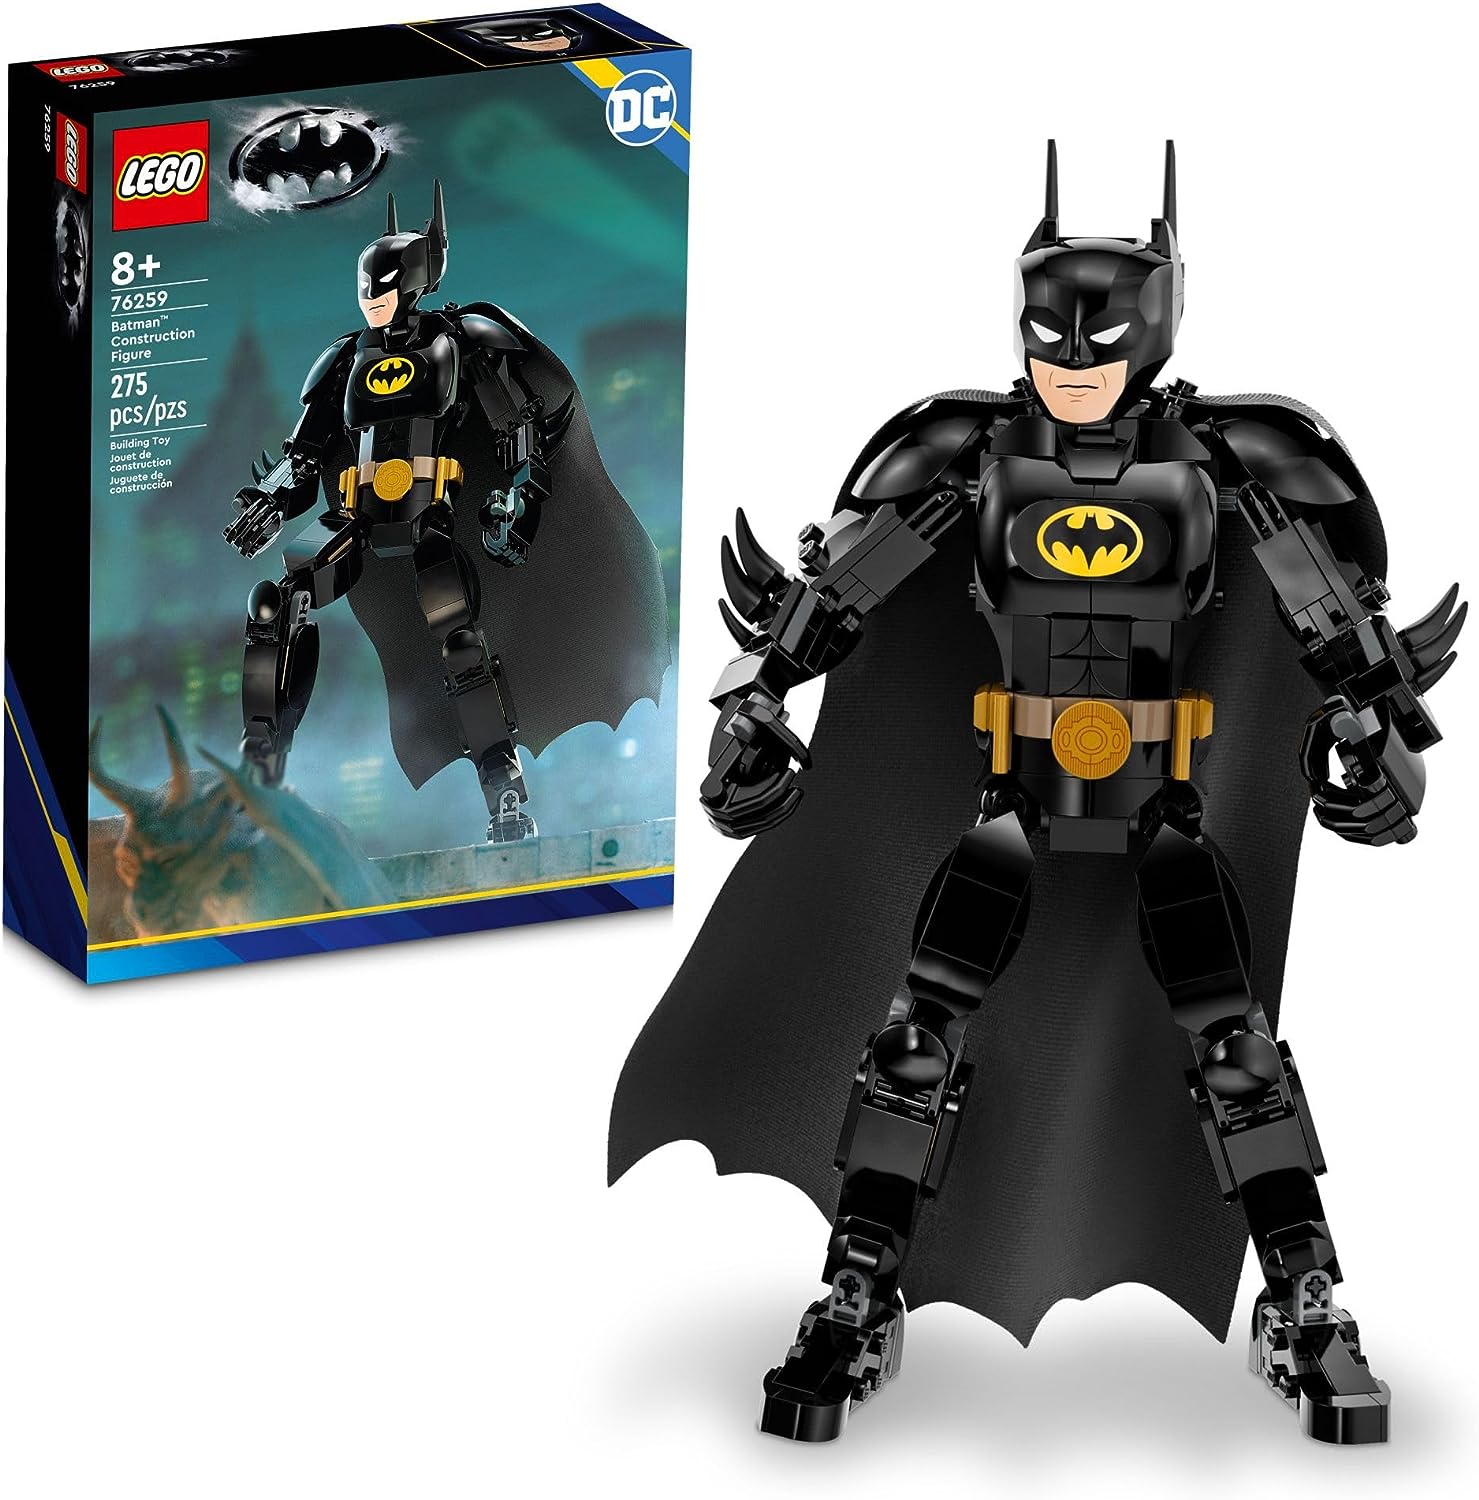 LEGO 76259 DC Batman Construction Figure Buildable DC Action Figure, Fully Jointed DC Toy for Play and Display with Cape and Authentic Details from the Batman Returns Movie